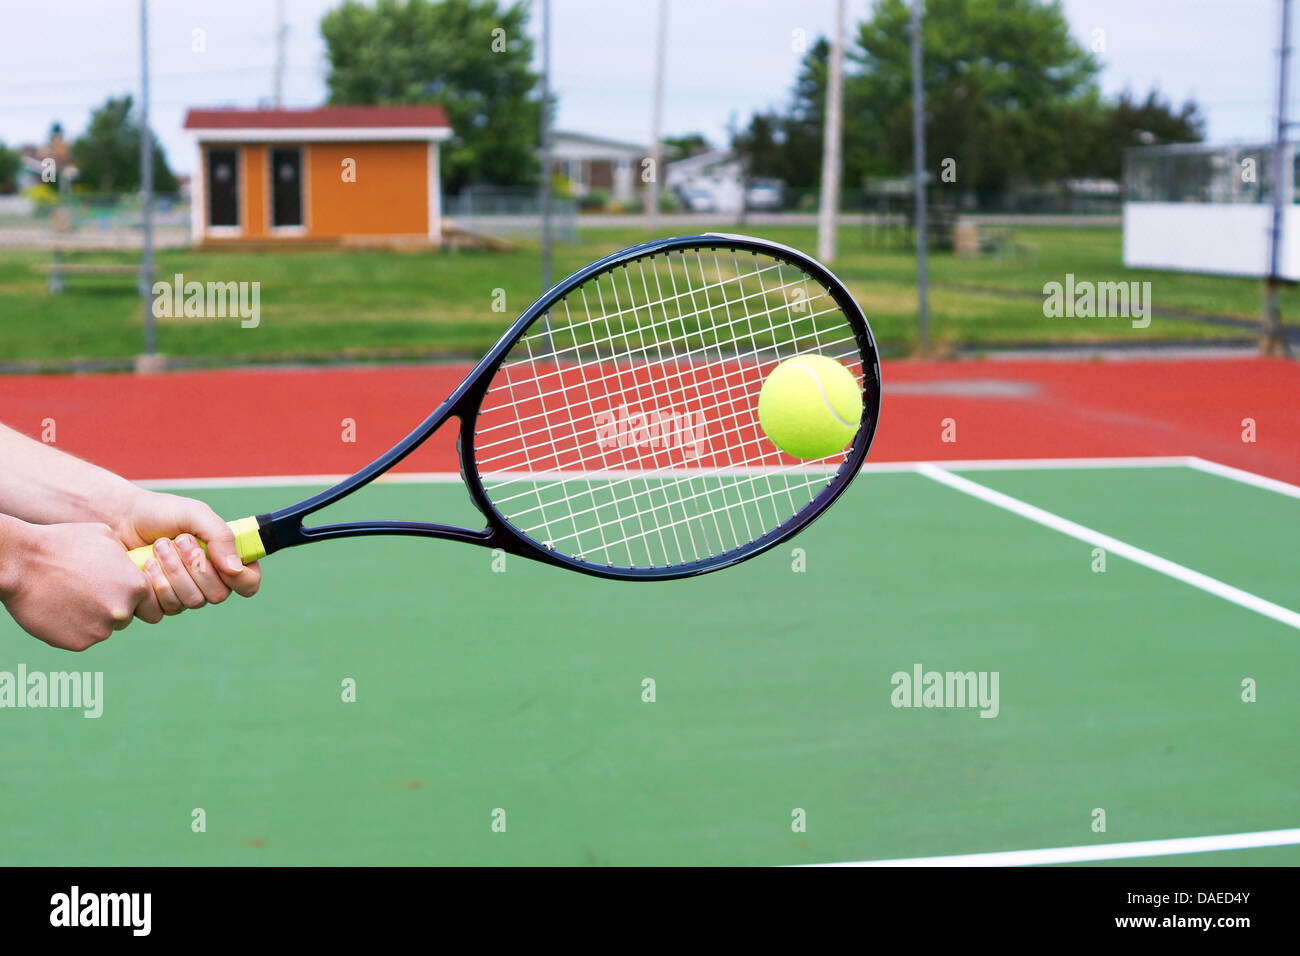 Player hands on tennis racket hitting a back hand volley Stock Photo